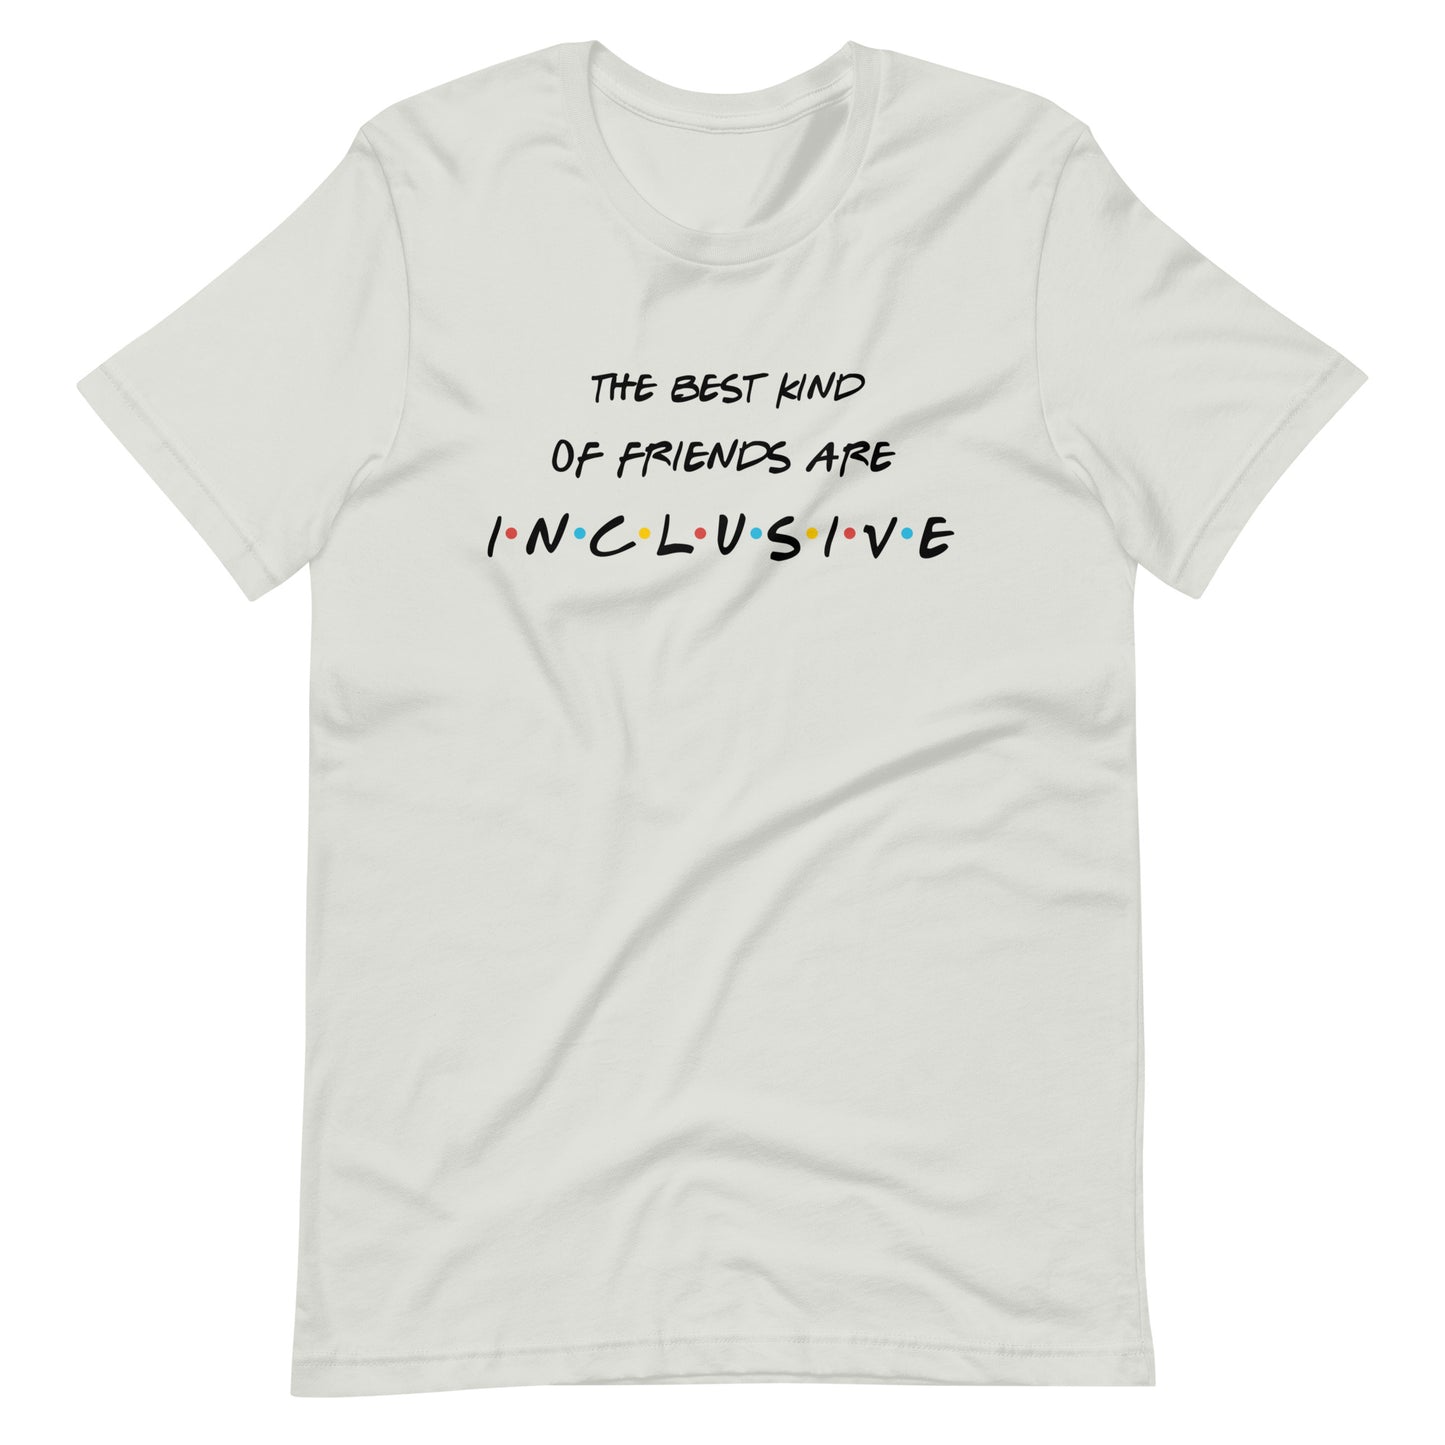 The Best Kind of Friends Are Inclusive | Adult Unisex Tee